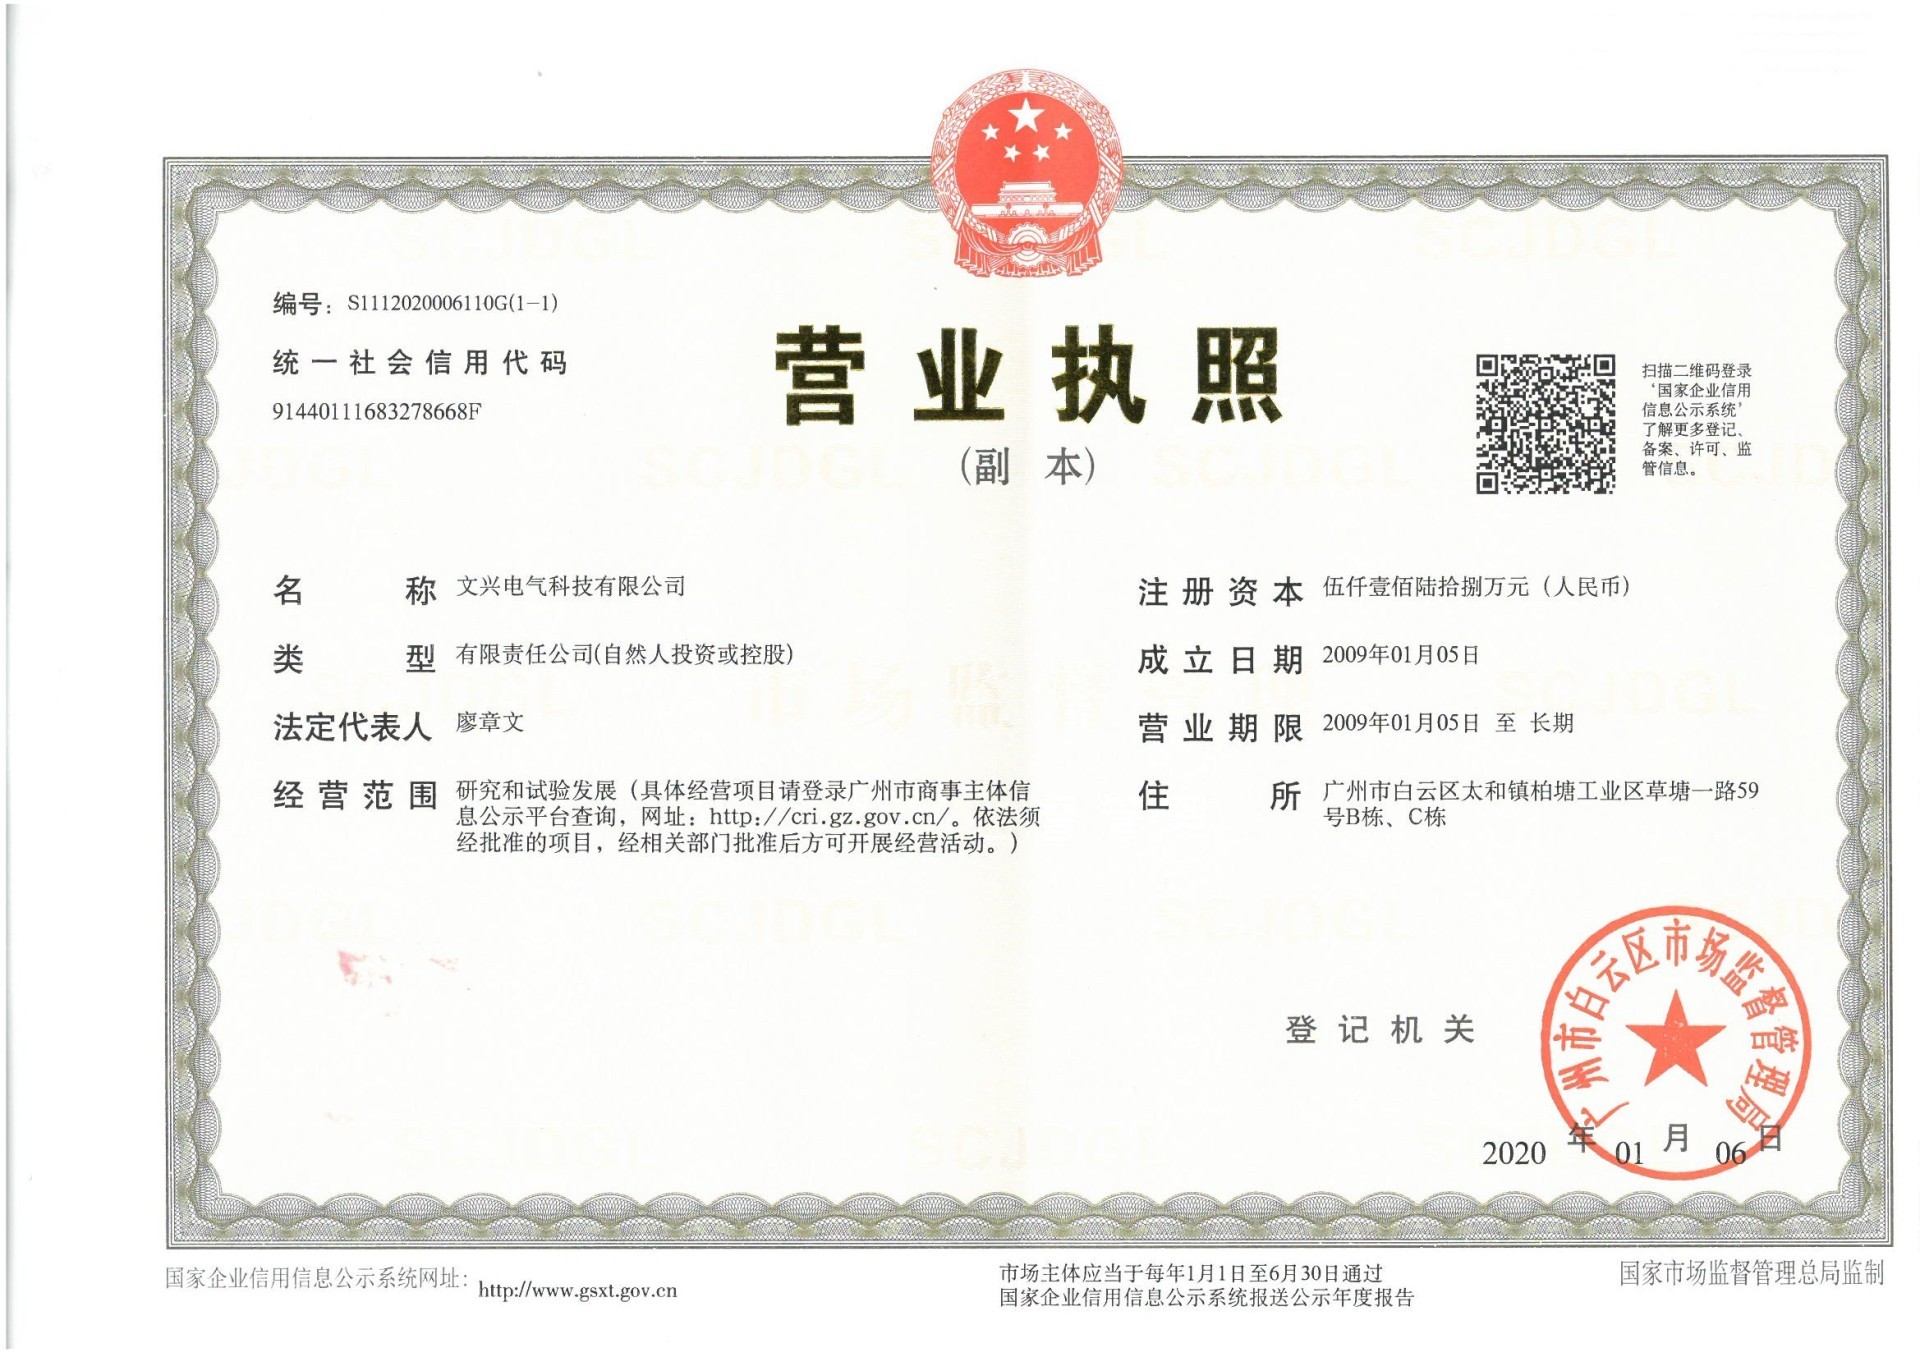 New Business License Copy (2020)